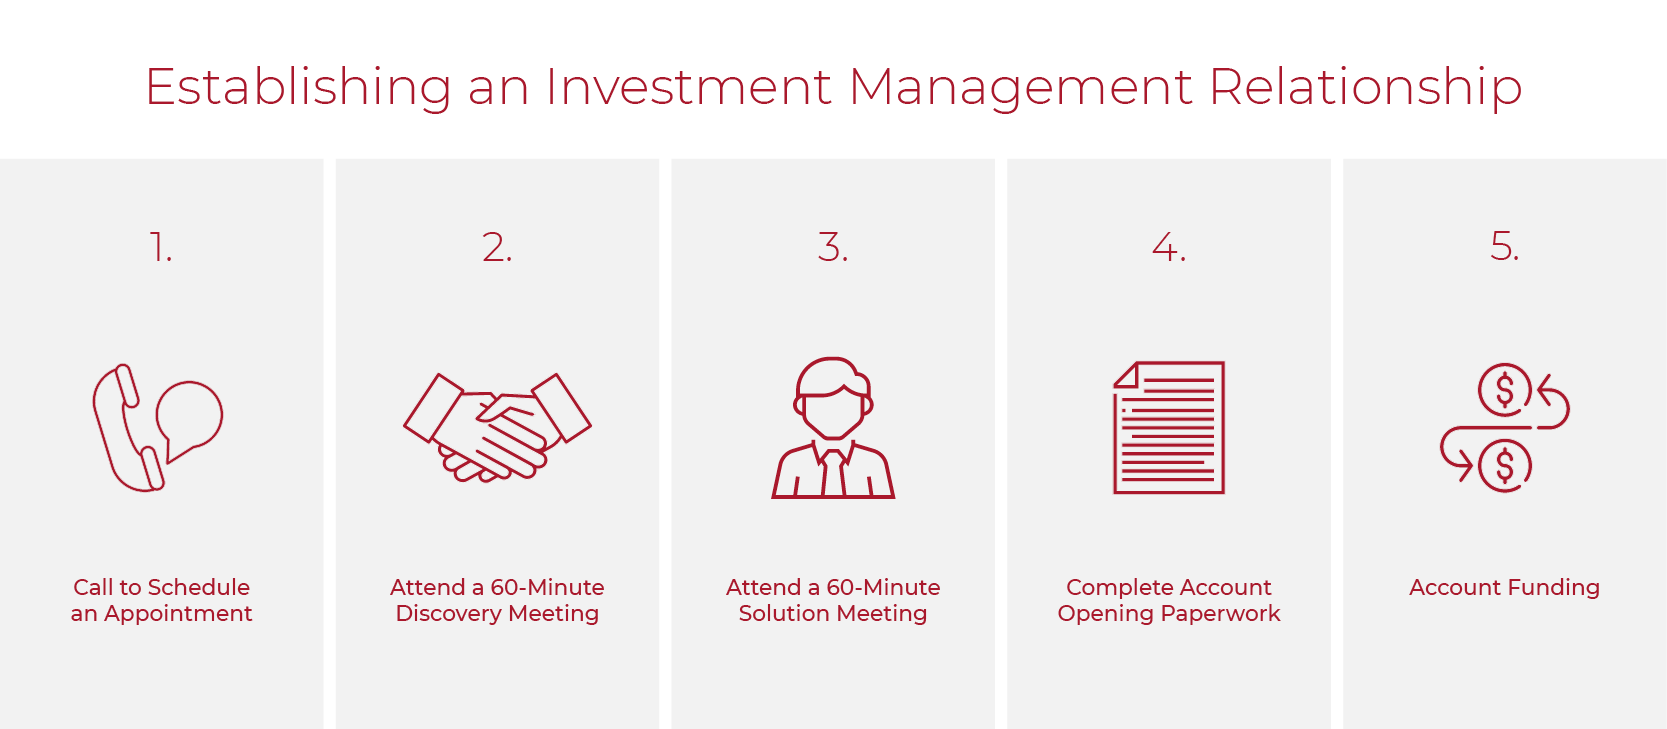 the 5 steps to establishing an investment management relationship